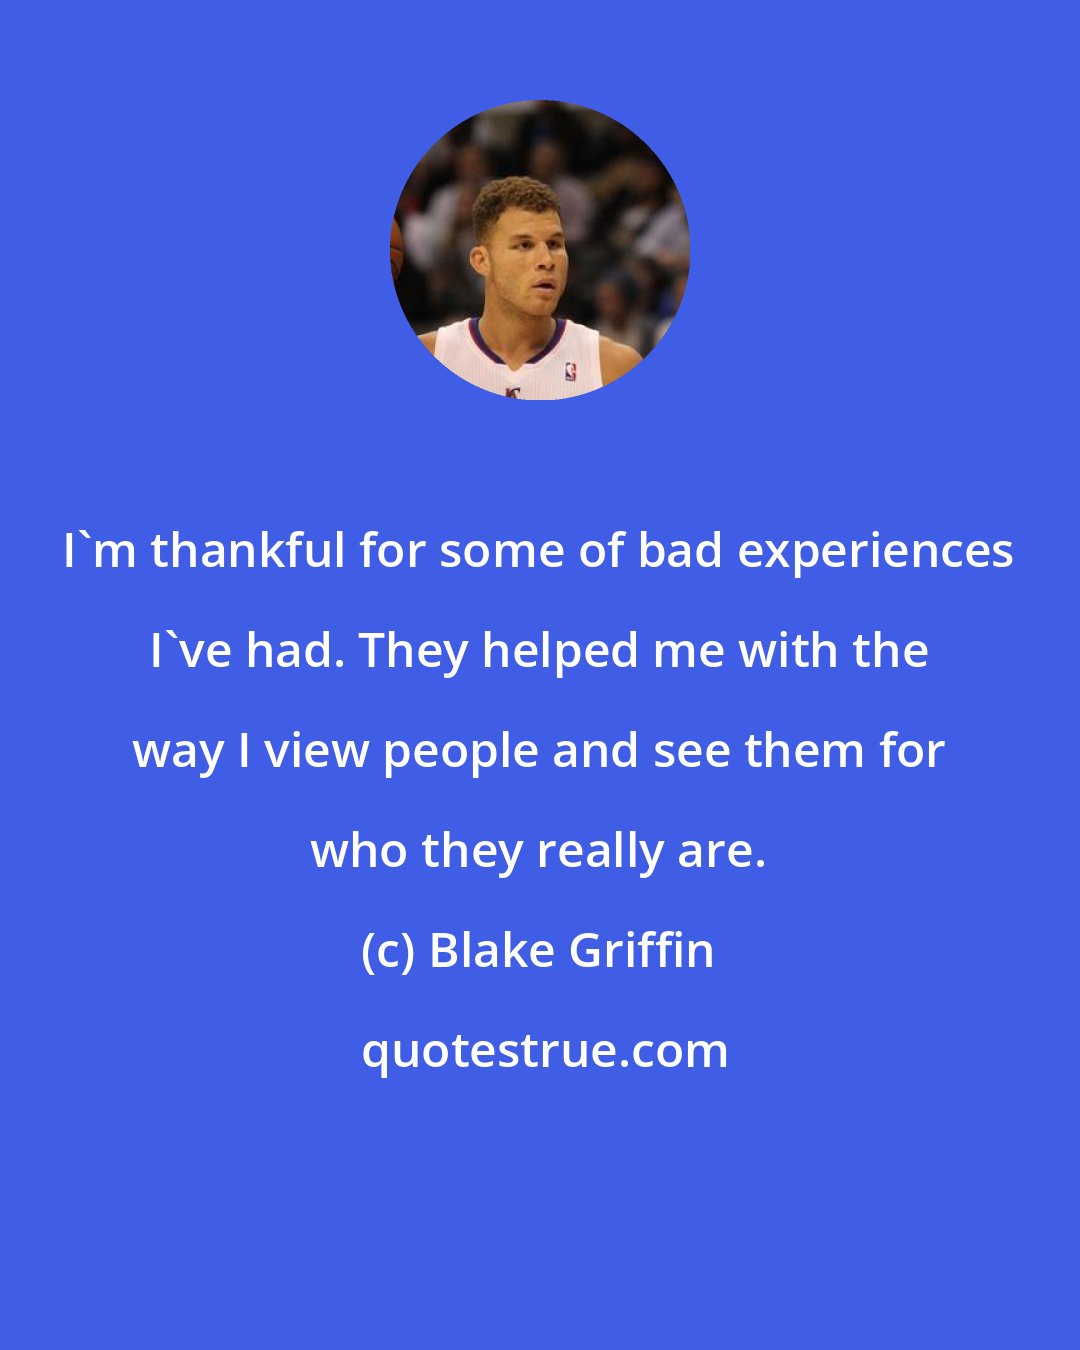 Blake Griffin: I'm thankful for some of bad experiences I've had. They helped me with the way I view people and see them for who they really are.